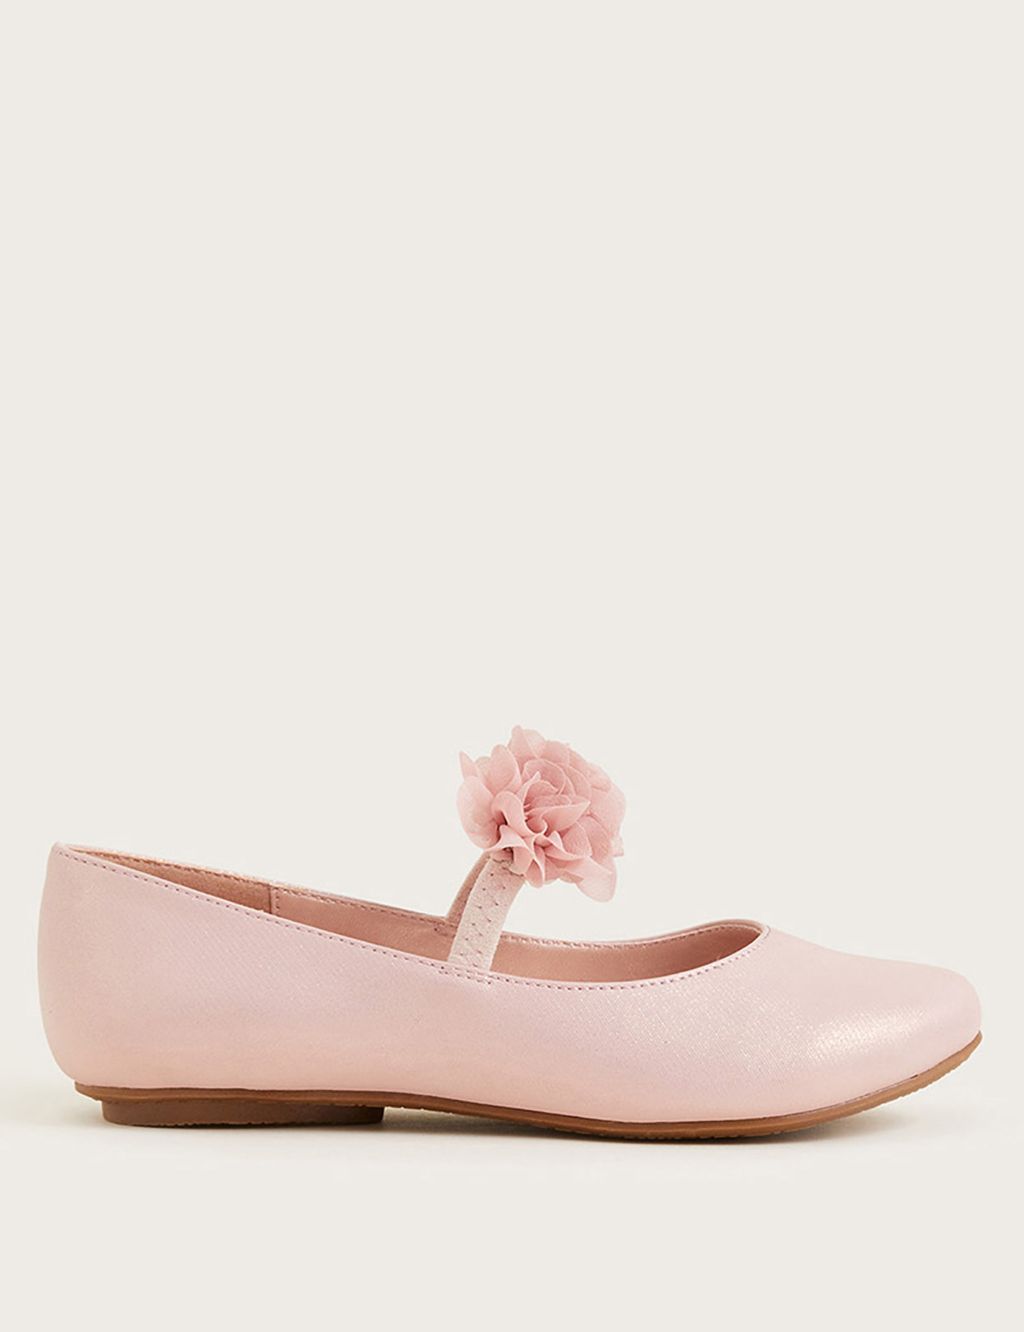 Kids' Floral Ballerina Party Shoes image 1